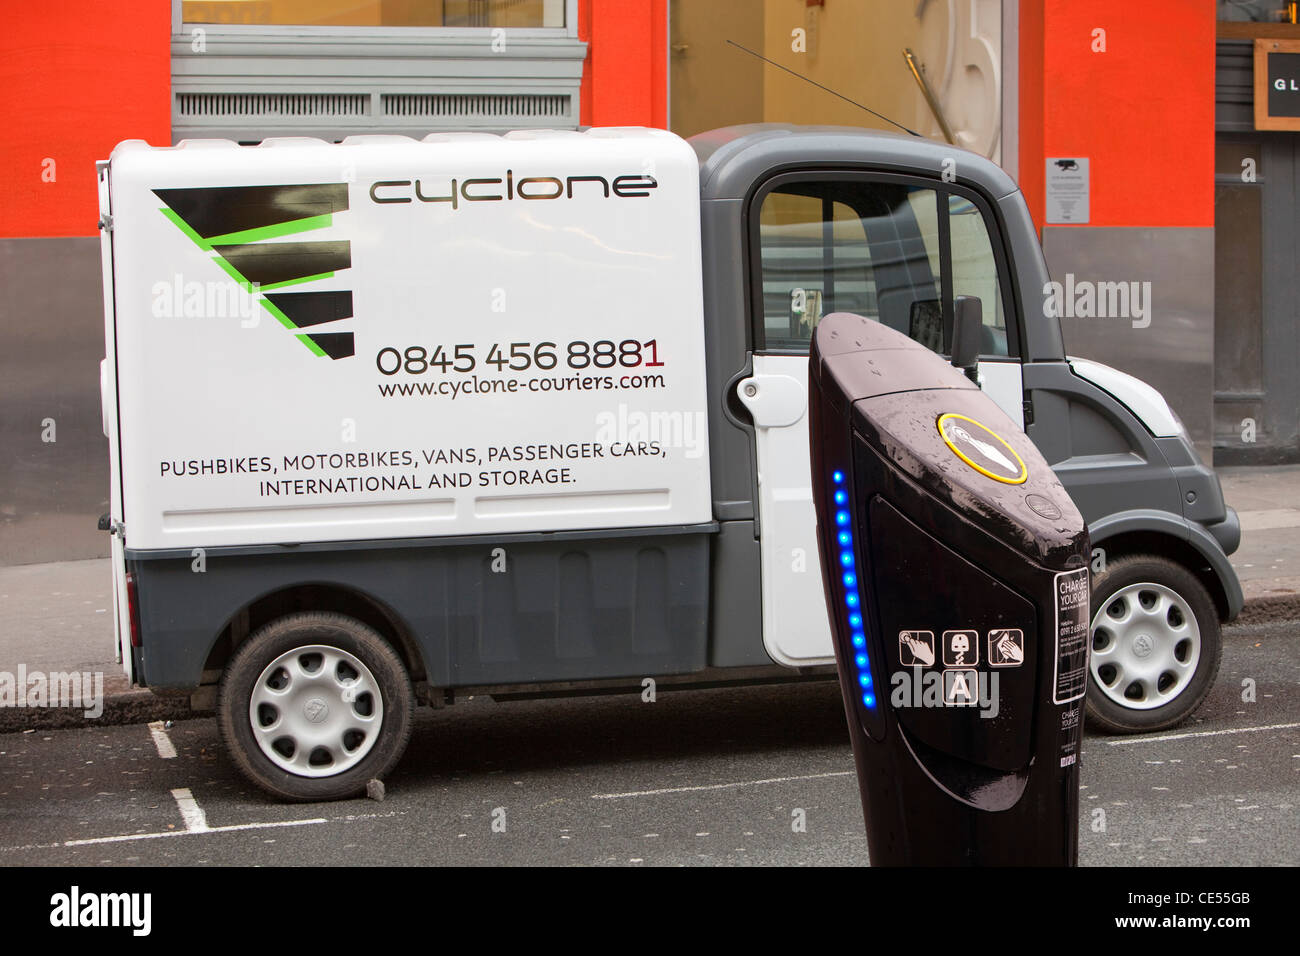 A Mega van electric vehicle in Westminster, London, UK, with an electric vehicle charging station. Stock Photo